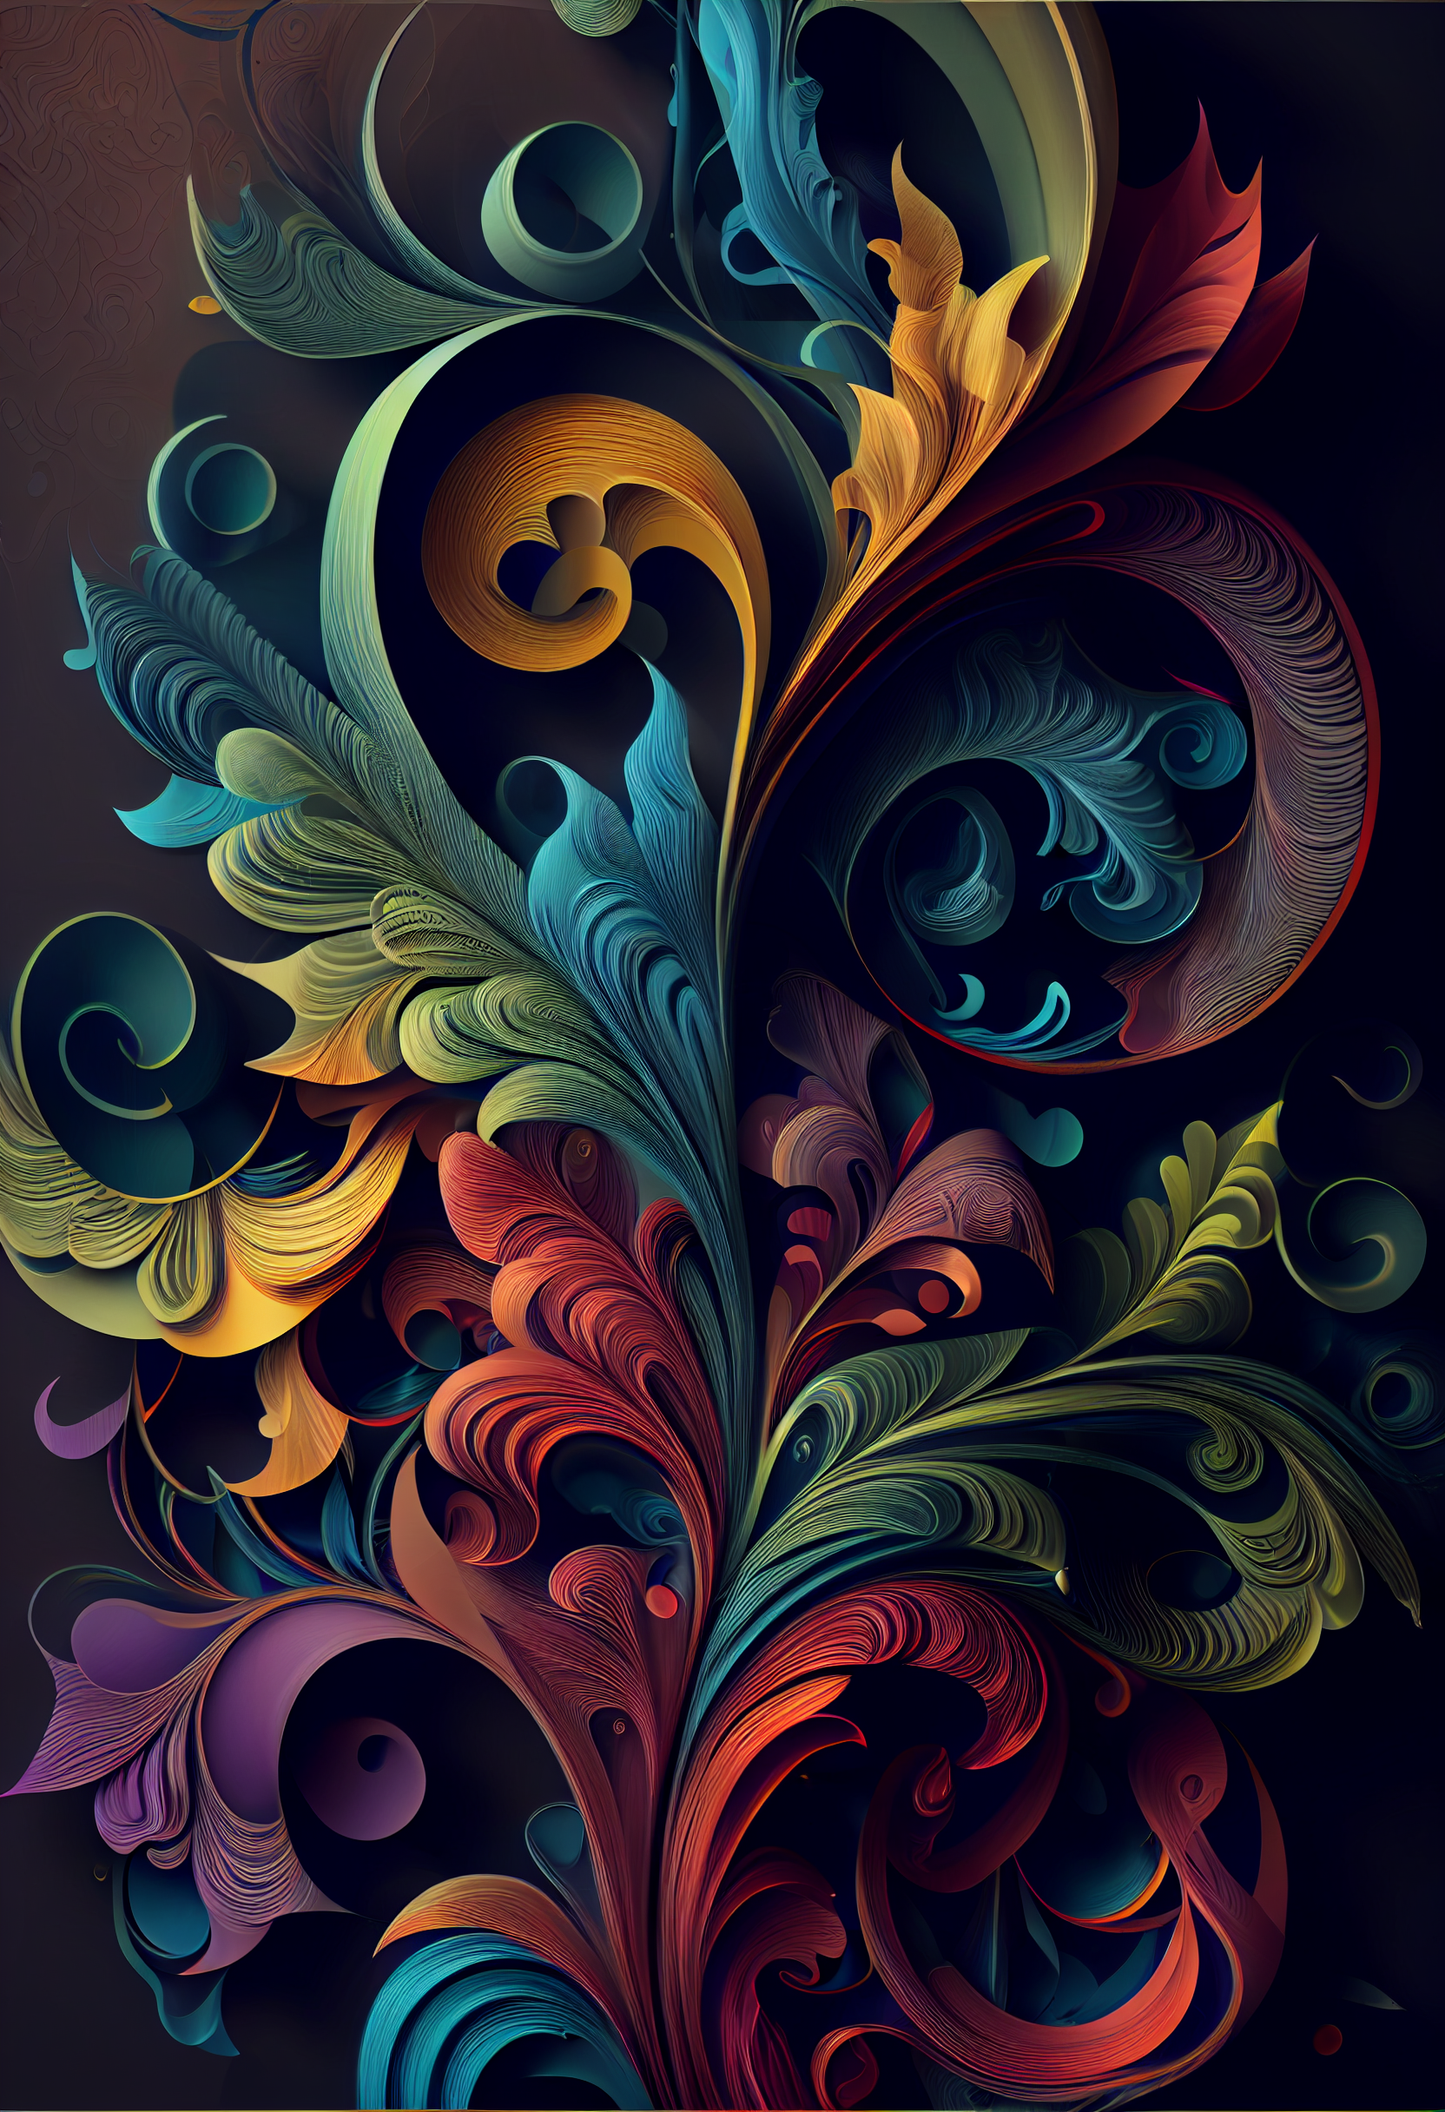 Free iPhone Backgrounds - Vibrant Color Swirls